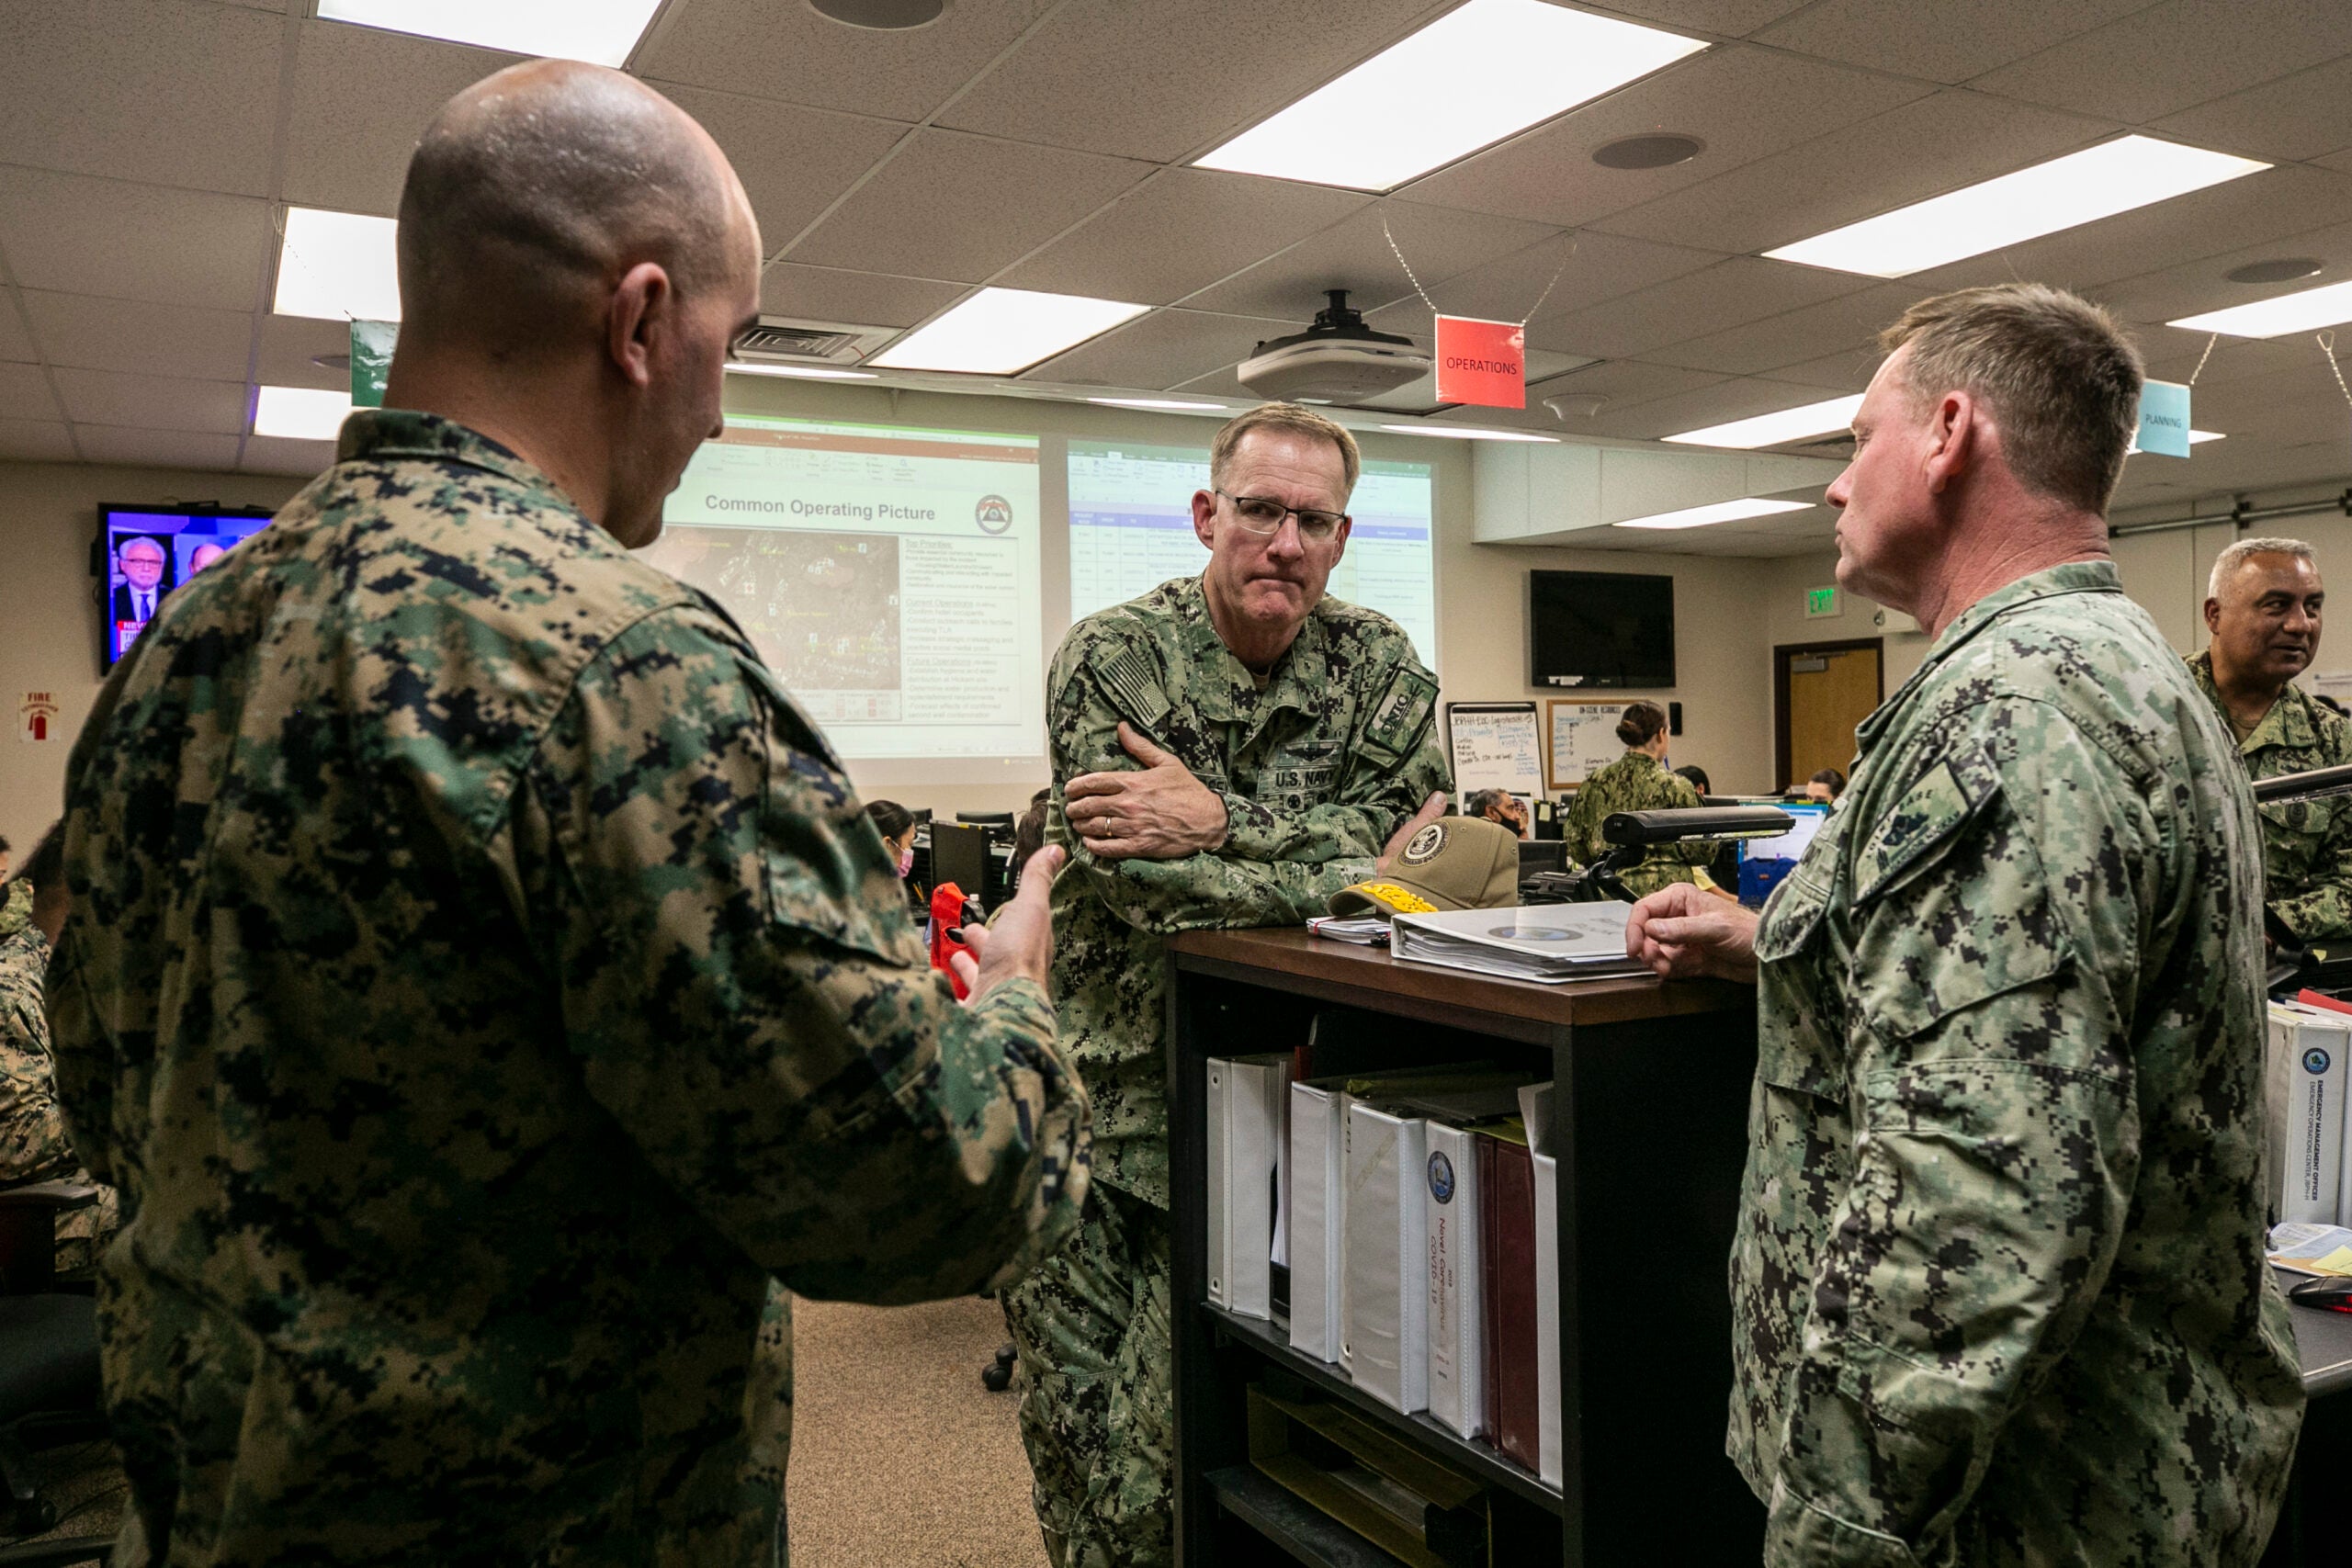 U.S. Navy Vice Admiral Yancy B. Lindsey, middle, commander of Navy Installations Command, speaks with U.S. Marine Corps Maj. Sean P. Day, left, operations officer for Combat Logistics Regiment 3, 3rd Marine Logistics Group (MLG), and Capt. Erik A. Spitzer, middle, commander of Joint Base Pearl Harbor-Hickam, during an Emergency Operations Center meeting on Joint Base Pearl Harbor-Hickam, Oahu, Hawaii, Dec. 11, 2021. U.S. Marines with 3rd MLG, as part of Task Force KULEANA, are providing support services such as drinking water, field expedient showers and laundry facilities to the residents of Joint Base Pearl Harbor-Hickam affected by the ongoing water issue. 3rd MLG, based out of Okinawa, Japan, is a forward deployed combat unit that serves as III Marine Expeditionary Force’s comprehensive logistics and combat service support backbone for operations throughout the Indo-Pacific area of responsibility. (U.S. Marine Corps photo by Sgt. Hailey D. Clay)